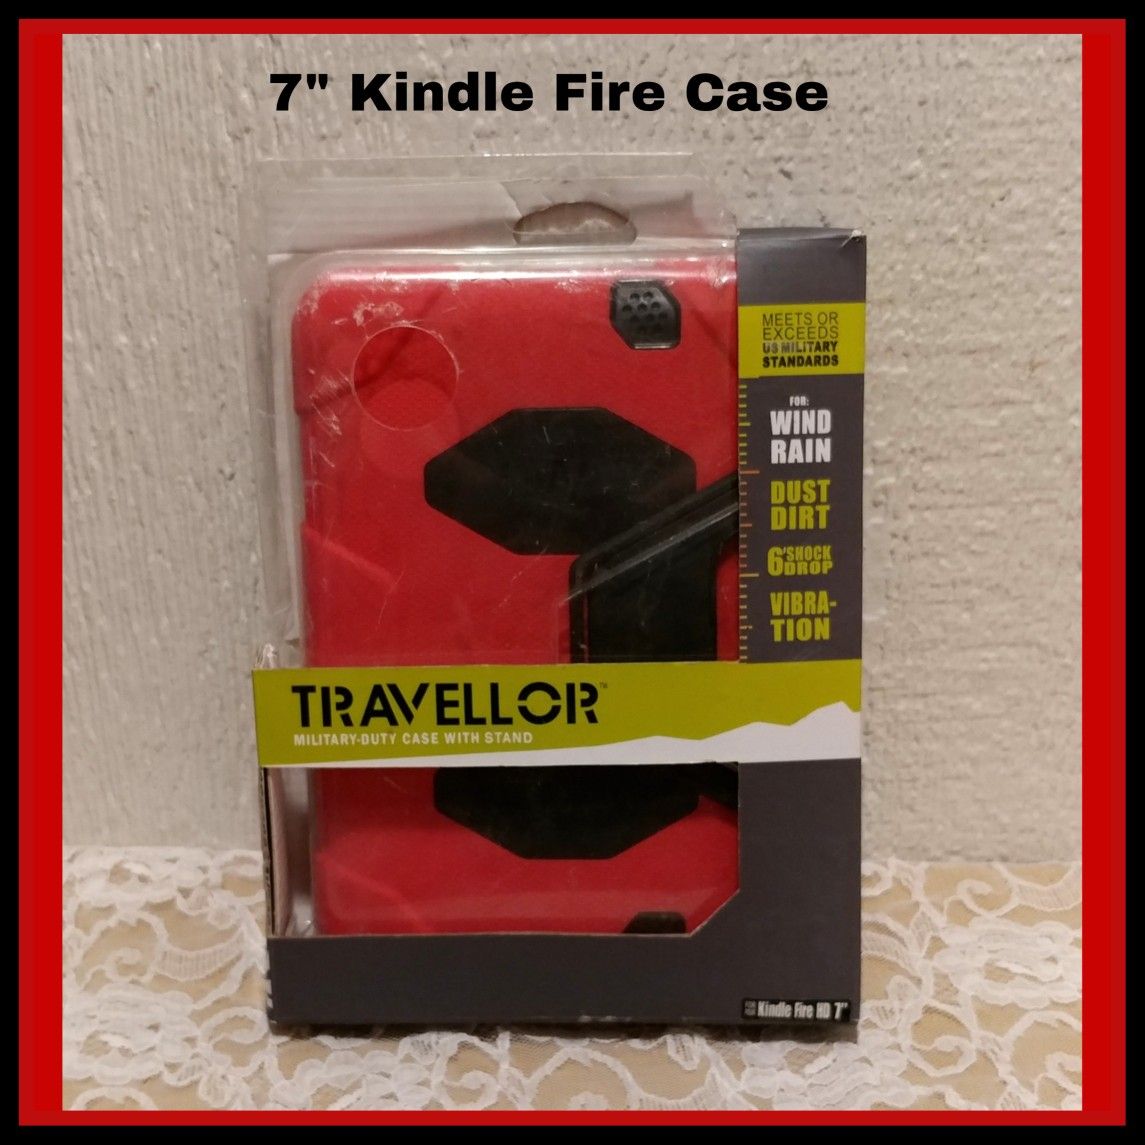 NEW 7" KINDLE FIRE CASE